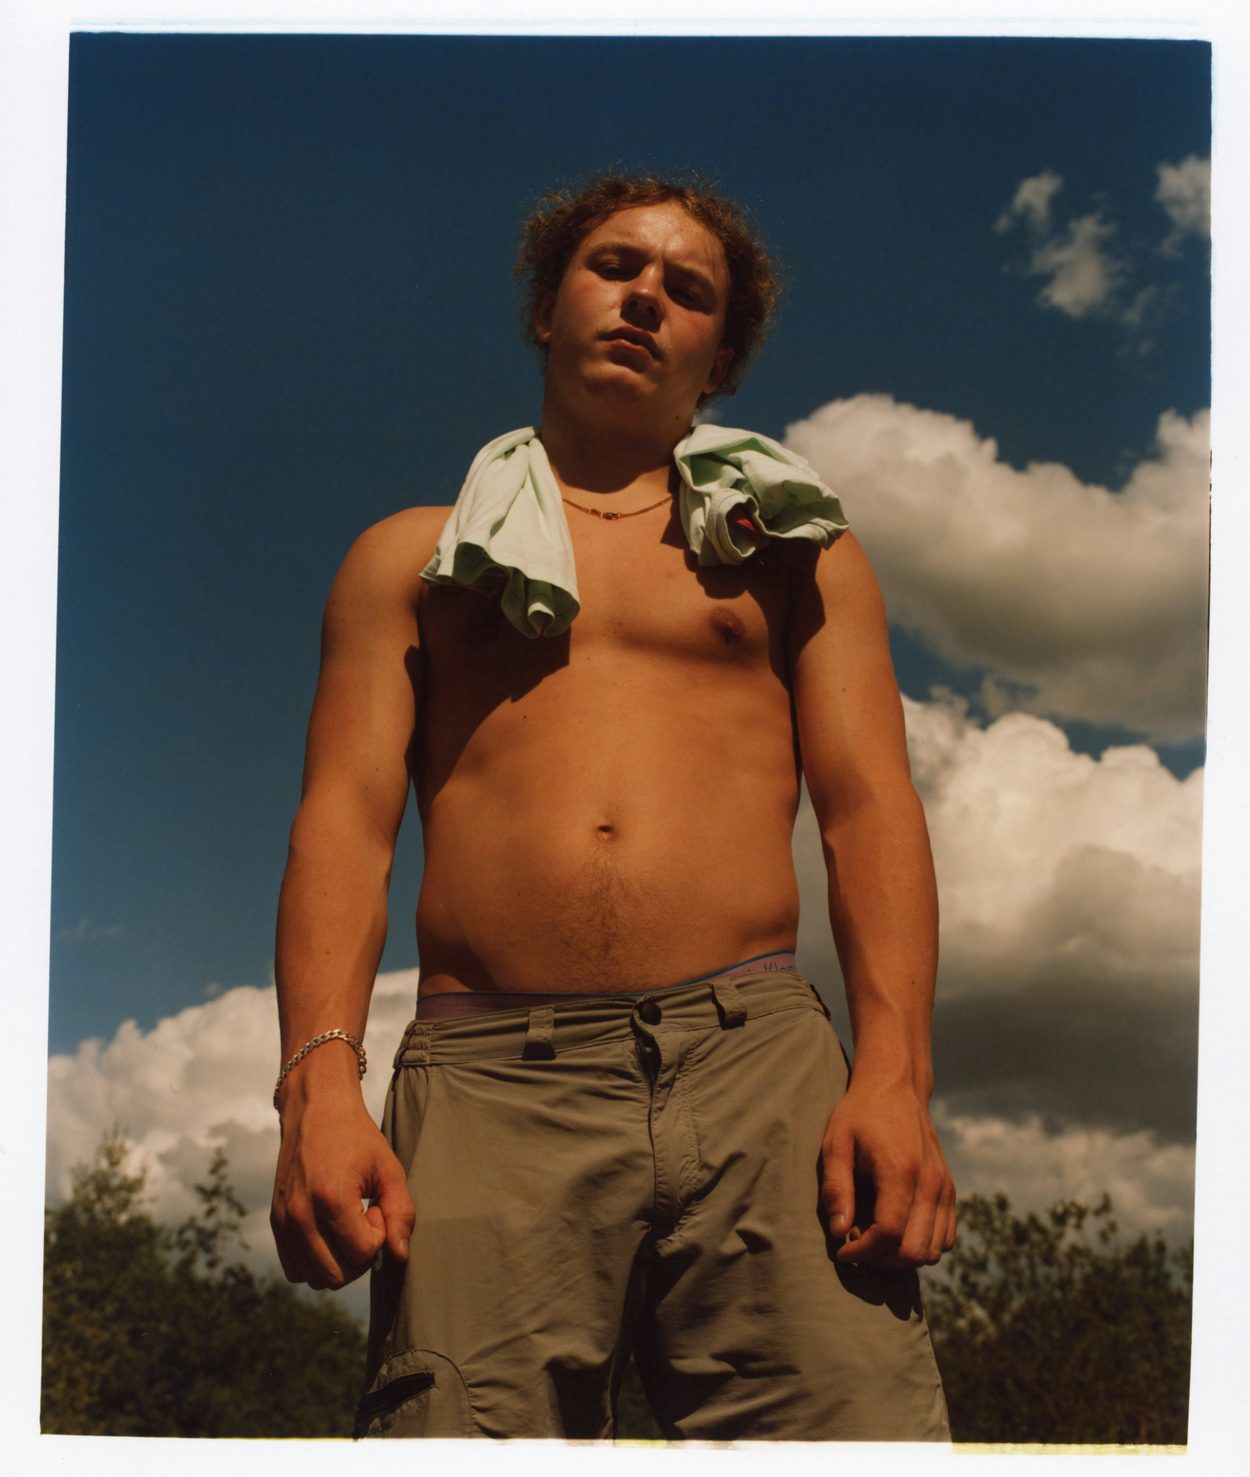 Photograph by Niall Hodson of a young person with their shirt slung over their shoulders